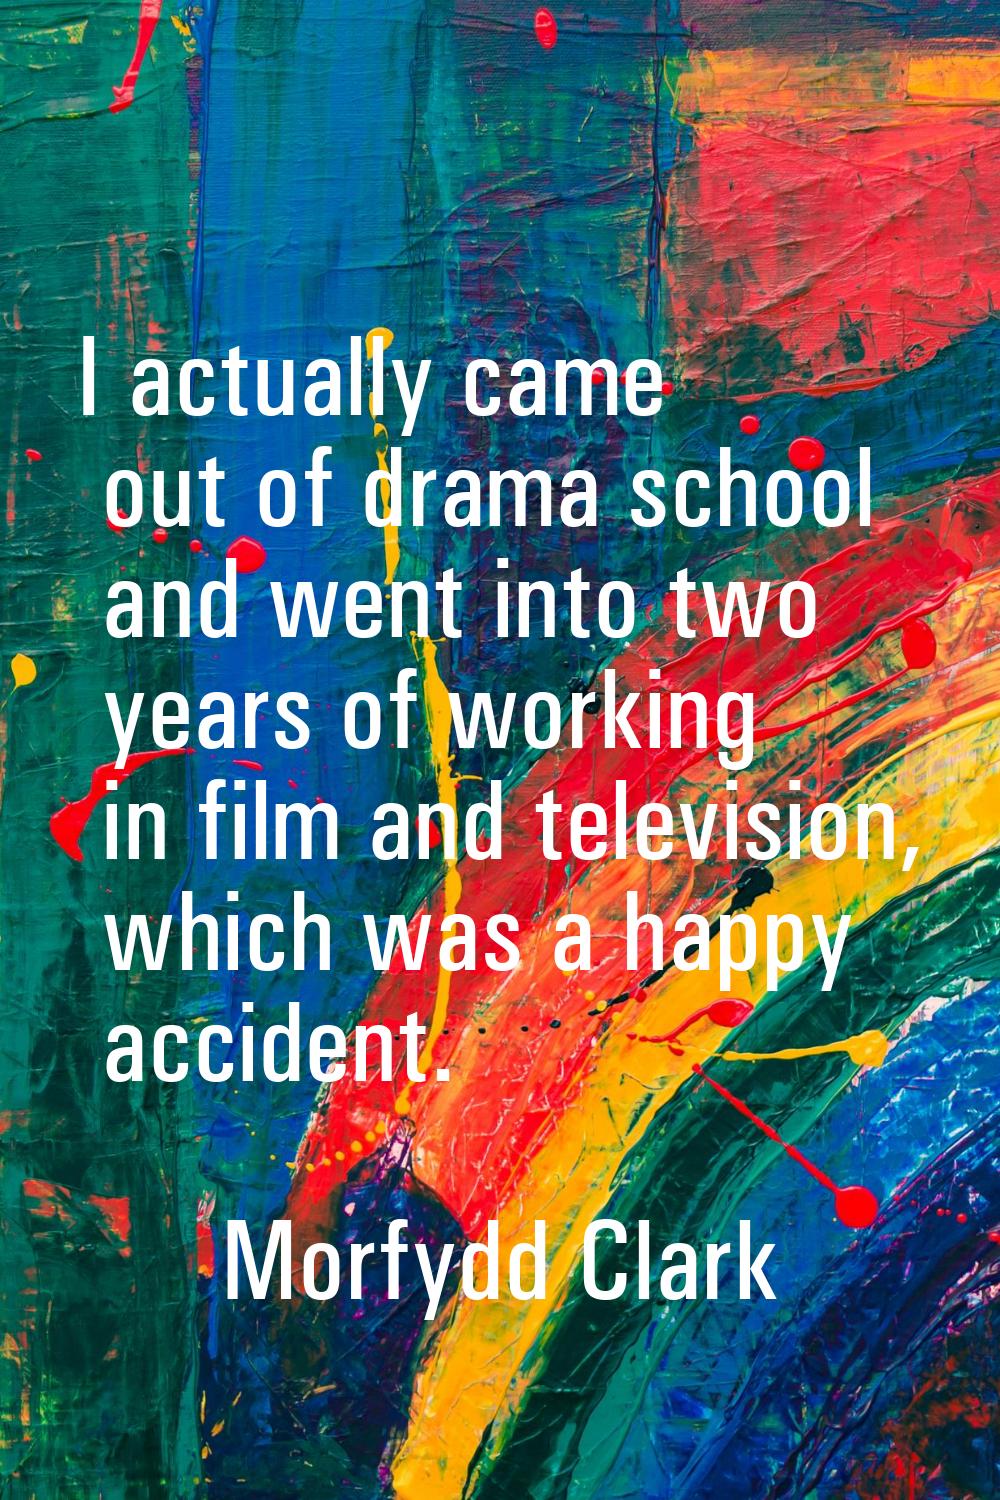 I actually came out of drama school and went into two years of working in film and television, whic